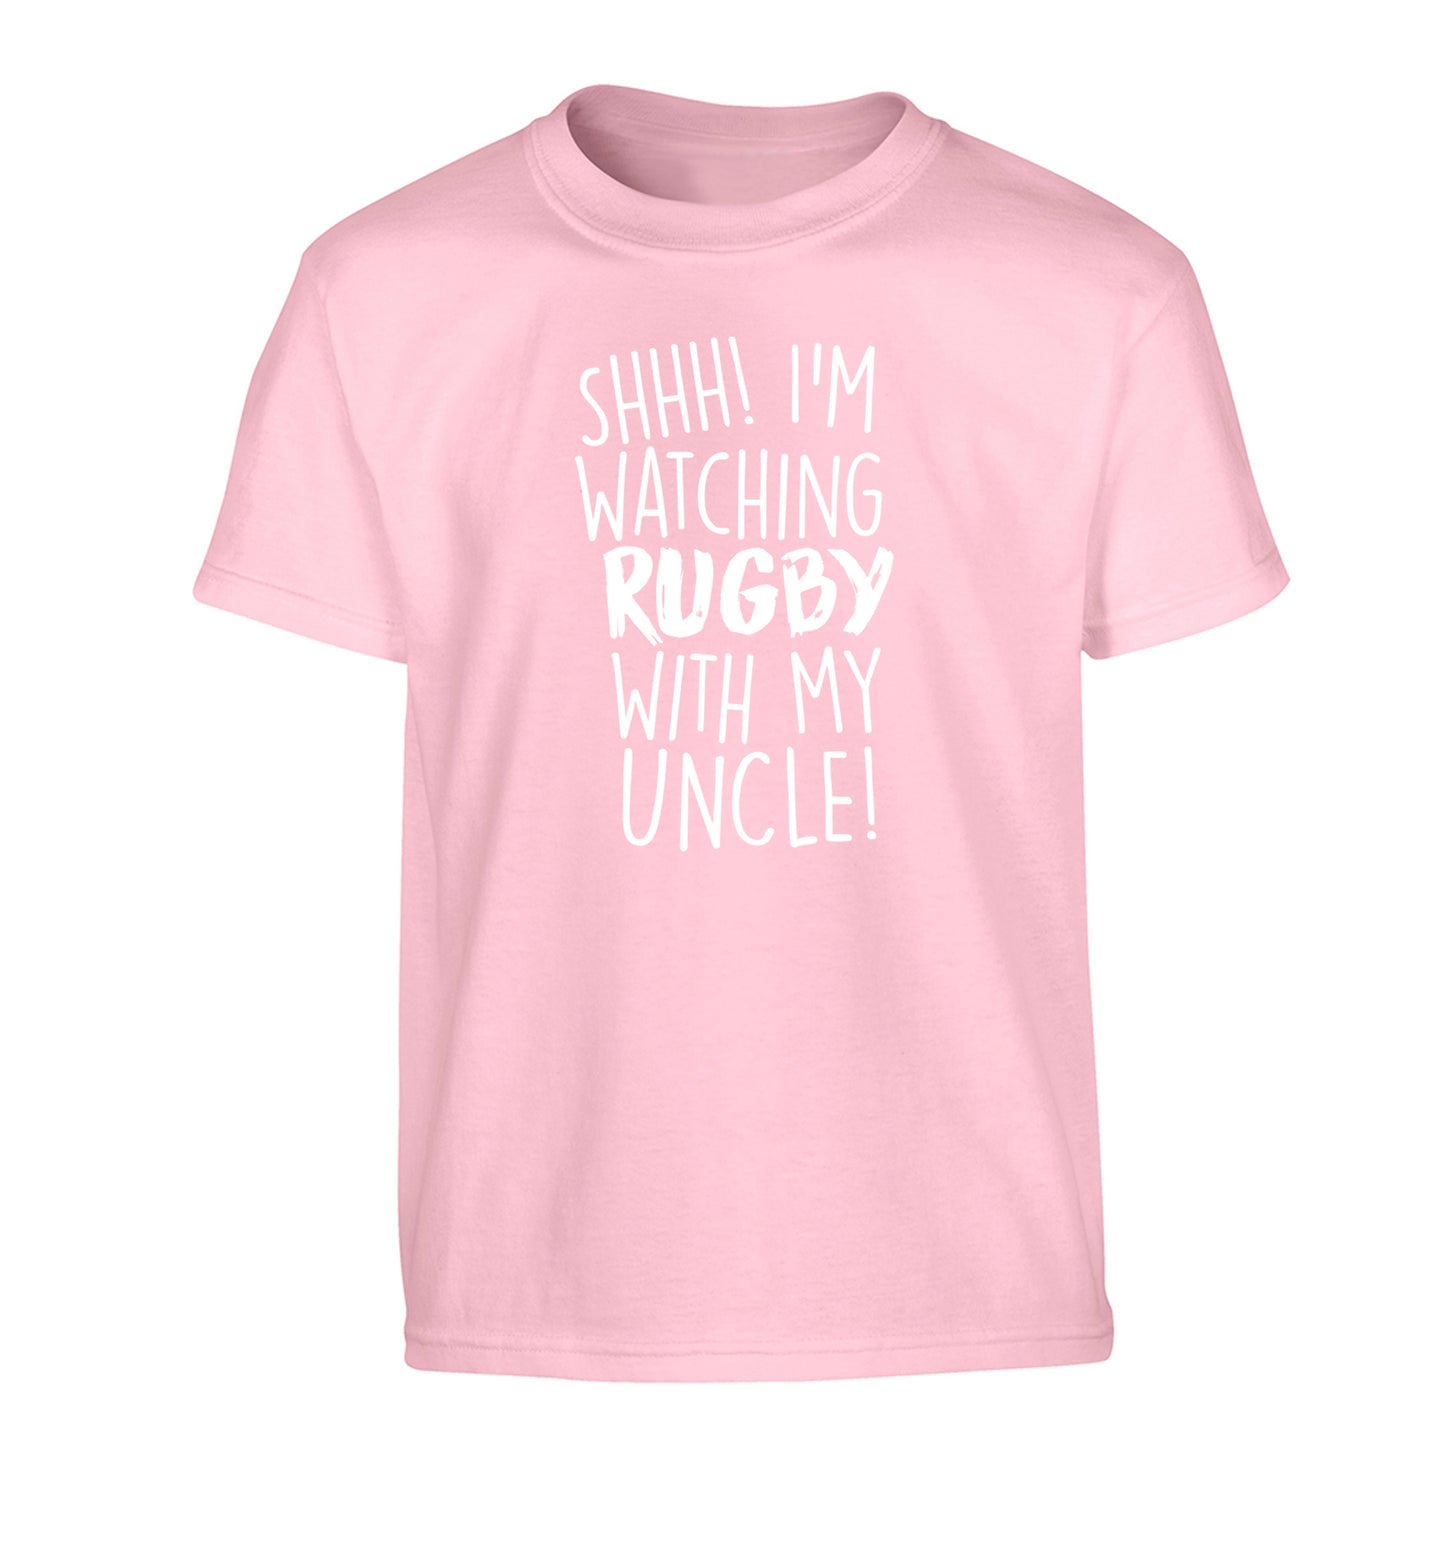 Shh.. I'm watching rugby with my uncle Children's light pink Tshirt 12-13 Years